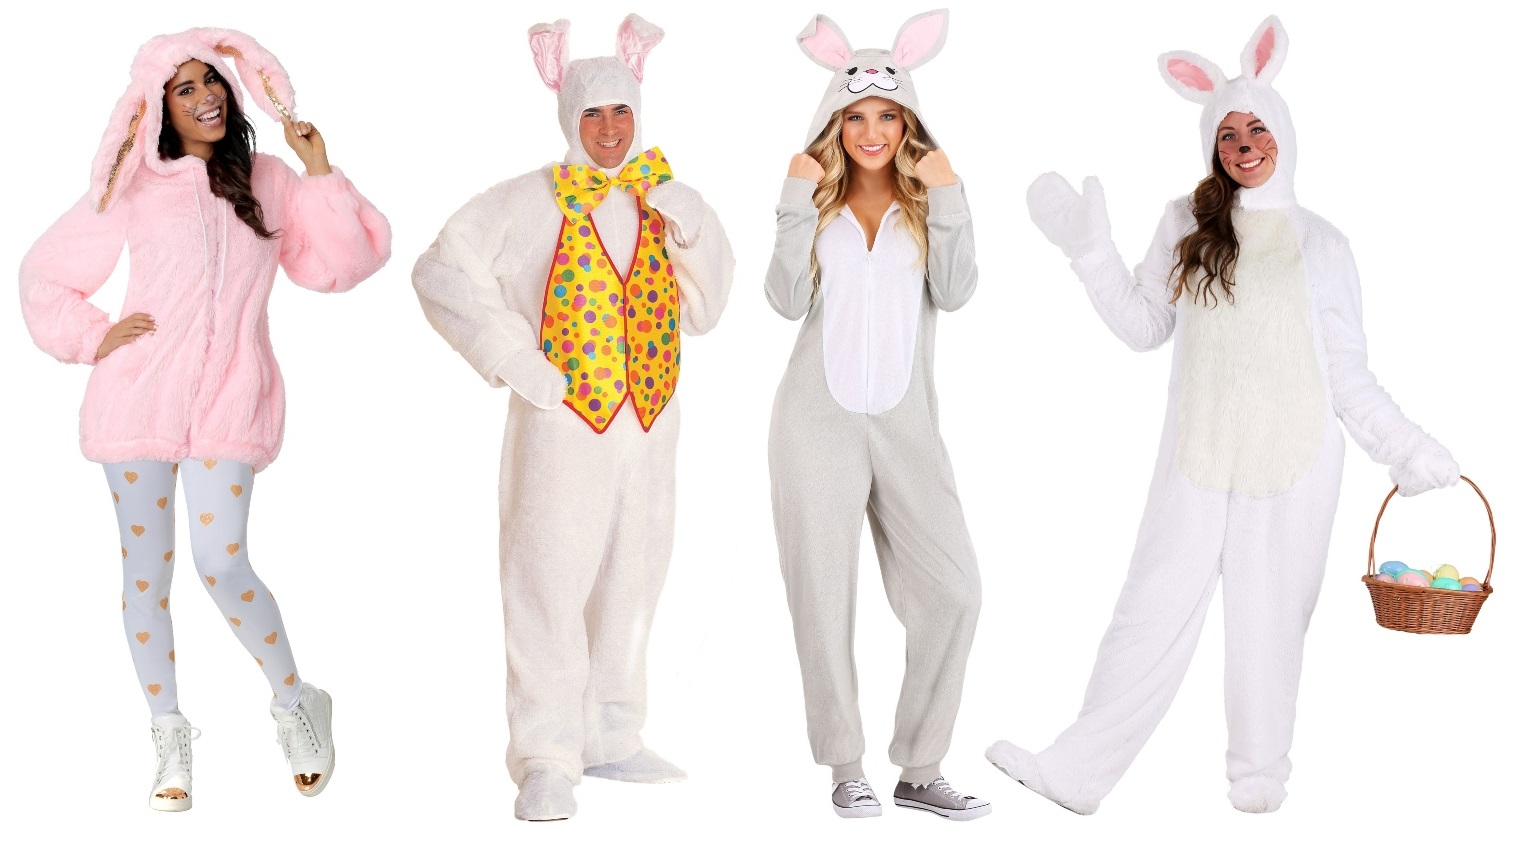 Bunny Costumes and More Easter Dress Up Ideas - HalloweenCostumes.com Blog